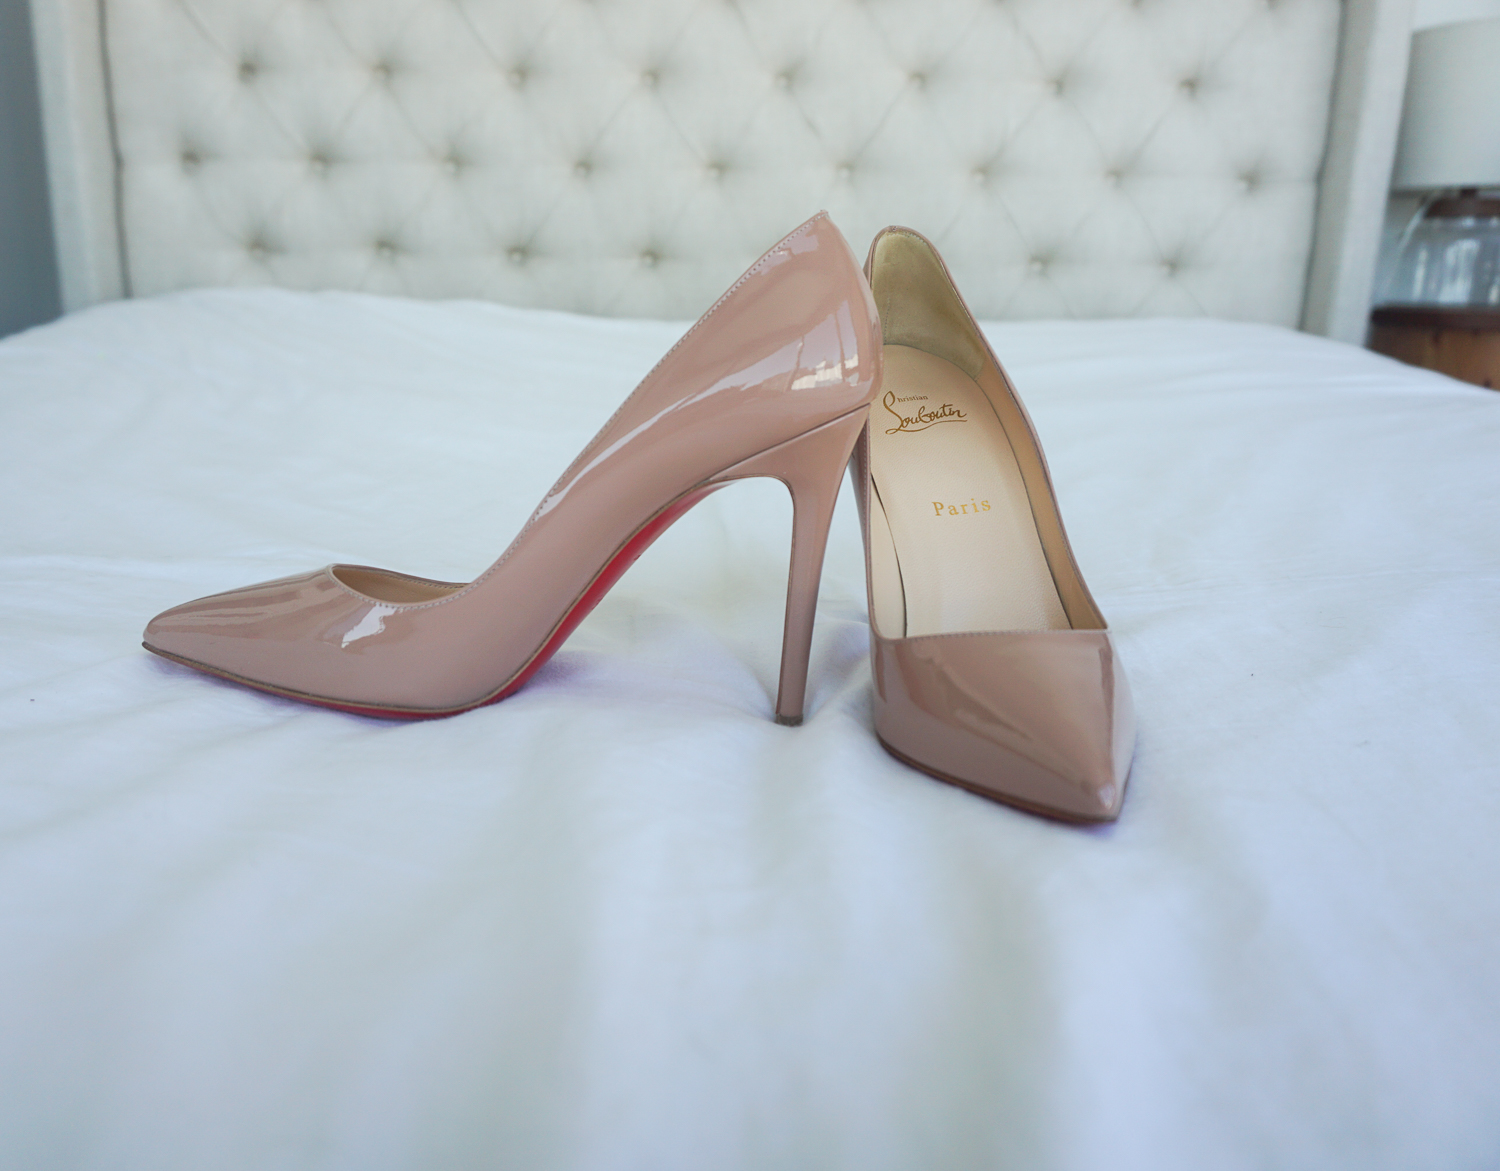 Christian Louboutin Heels Are Worth the Splurge; Here are 7 Reasons Why